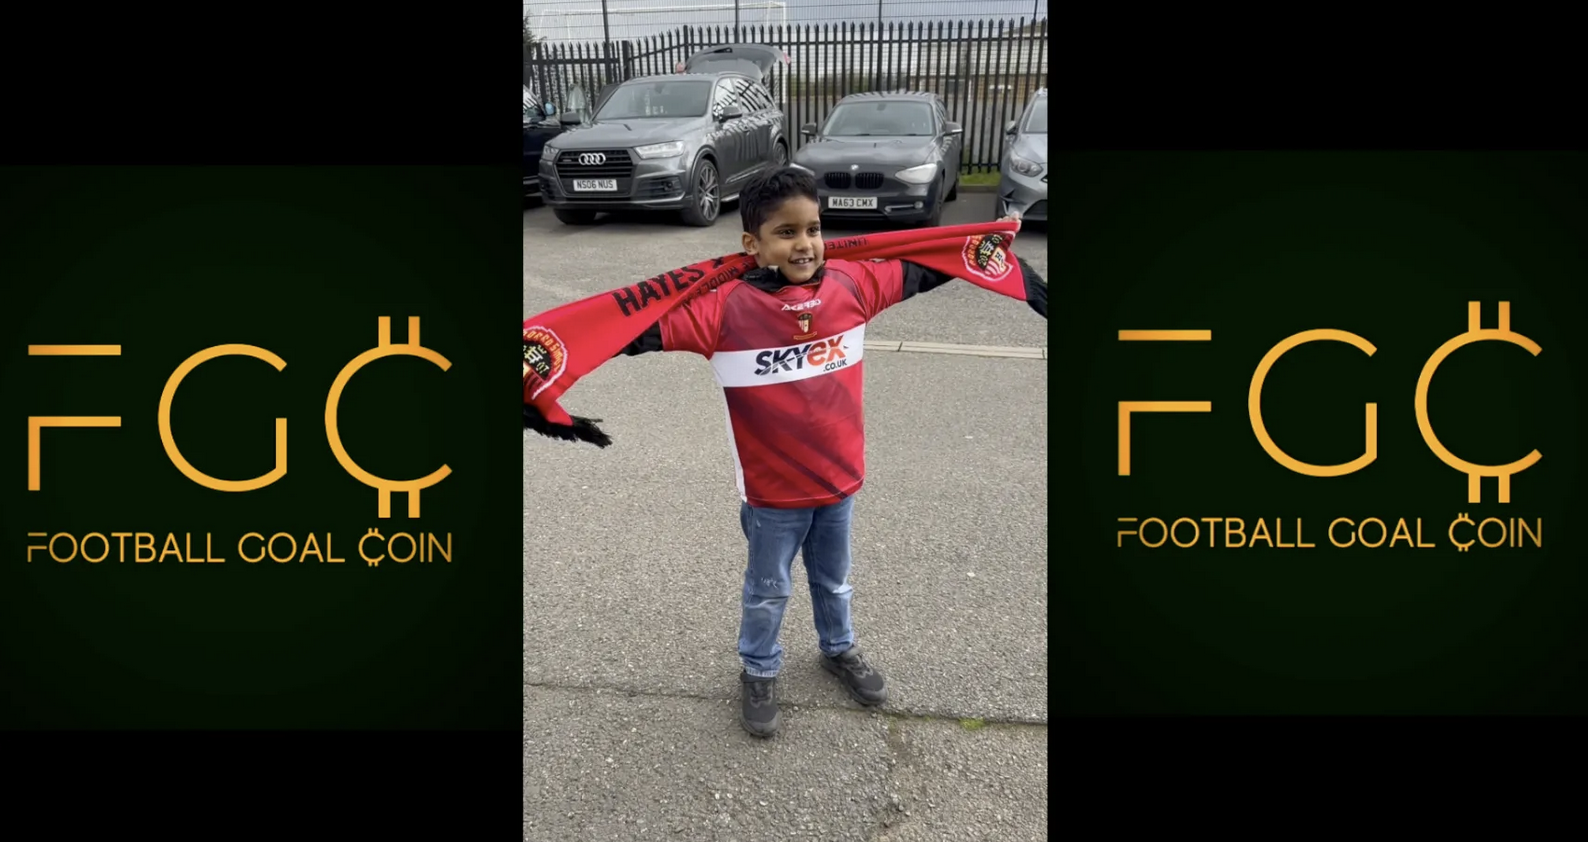 FGC Sponsors Young Football Fans To Become Mascots